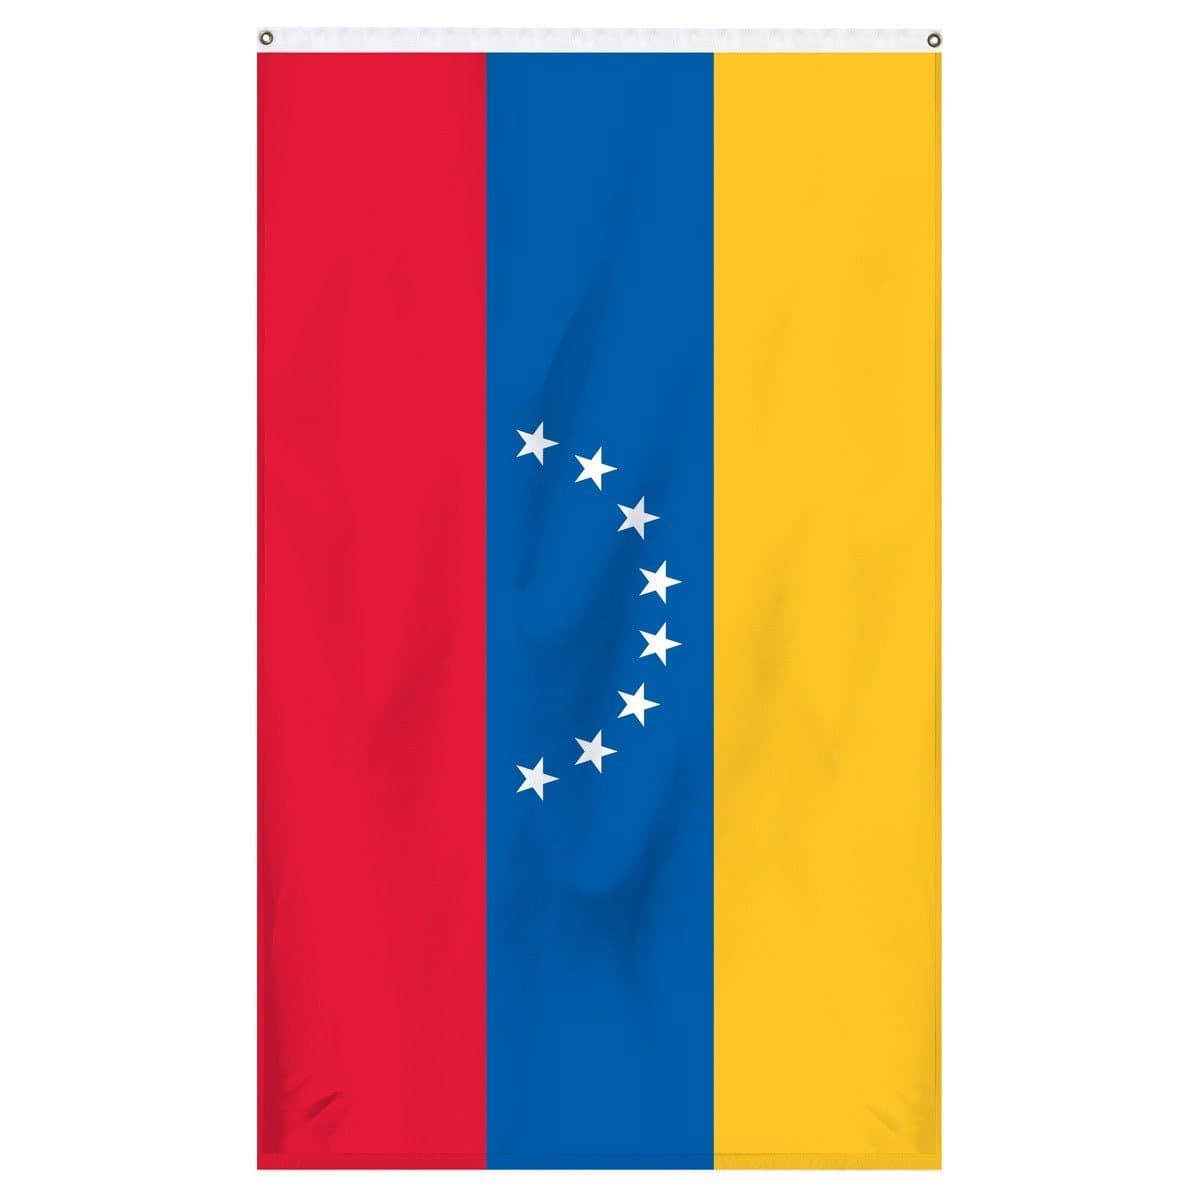 Venezuela National flag for sale to buy online from the American company Atlantic Flag and Pole. A horizontal tricolor of yellow, blue and red with the National Coat of Arms on the upper hoist-side of the yellow band and an arc of eight white five-pointed stars centered on the blue band.